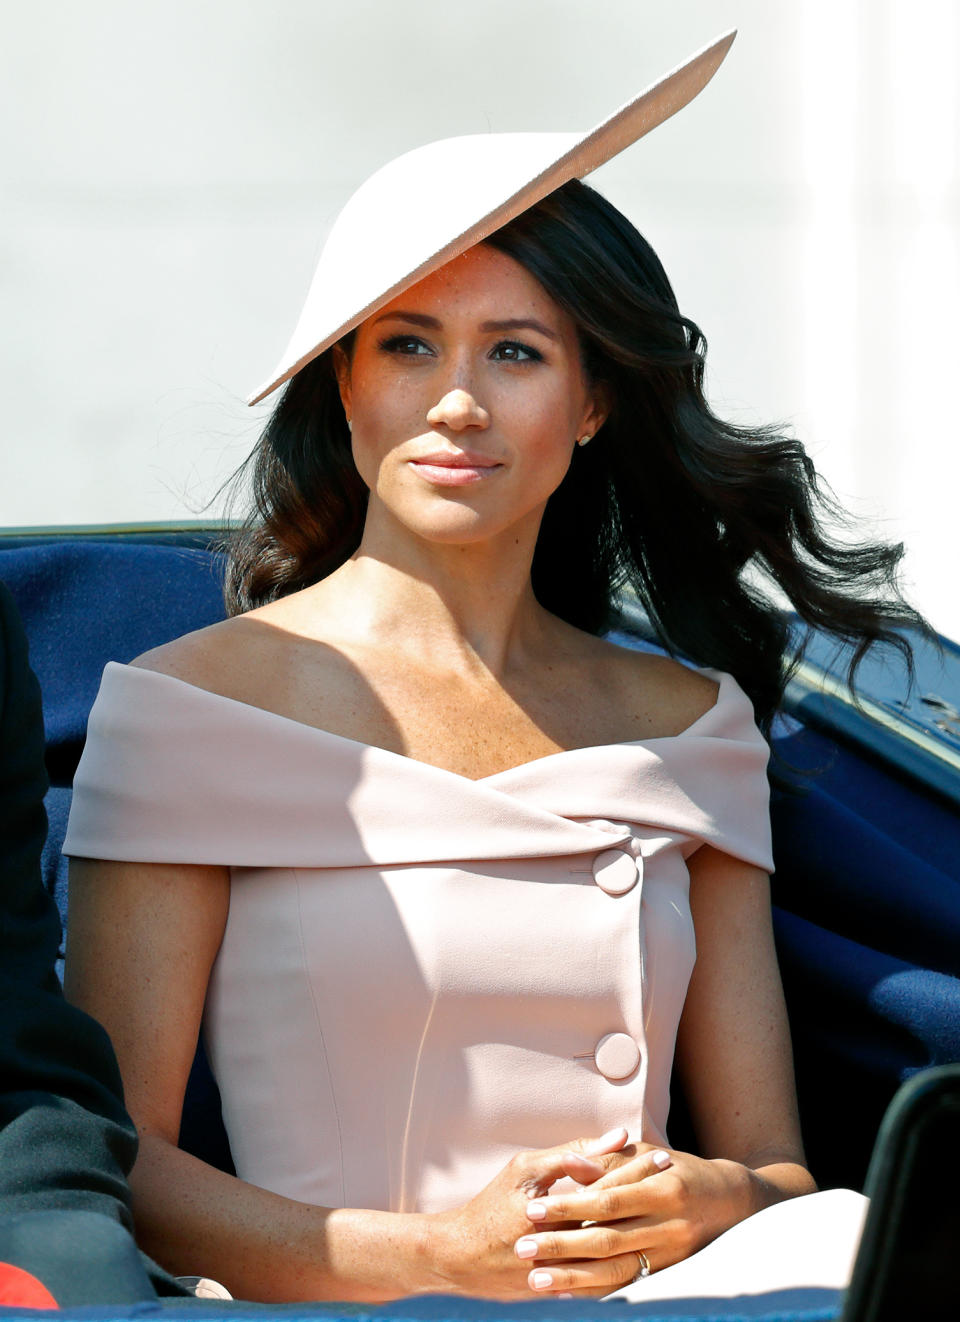 Meghan, Duchess of Sussex travels down The Mall in a horse drawn carriage during Trooping The Colour 2018 on June 9, 2018 in London, England. The annual ceremony involving over 1400 guardsmen and cavalry, is believed to have first been performed during the reign of King Charles II. The parade marks the official birthday of the Sovereign, even though the Queen's actual birthday is on April 21st.